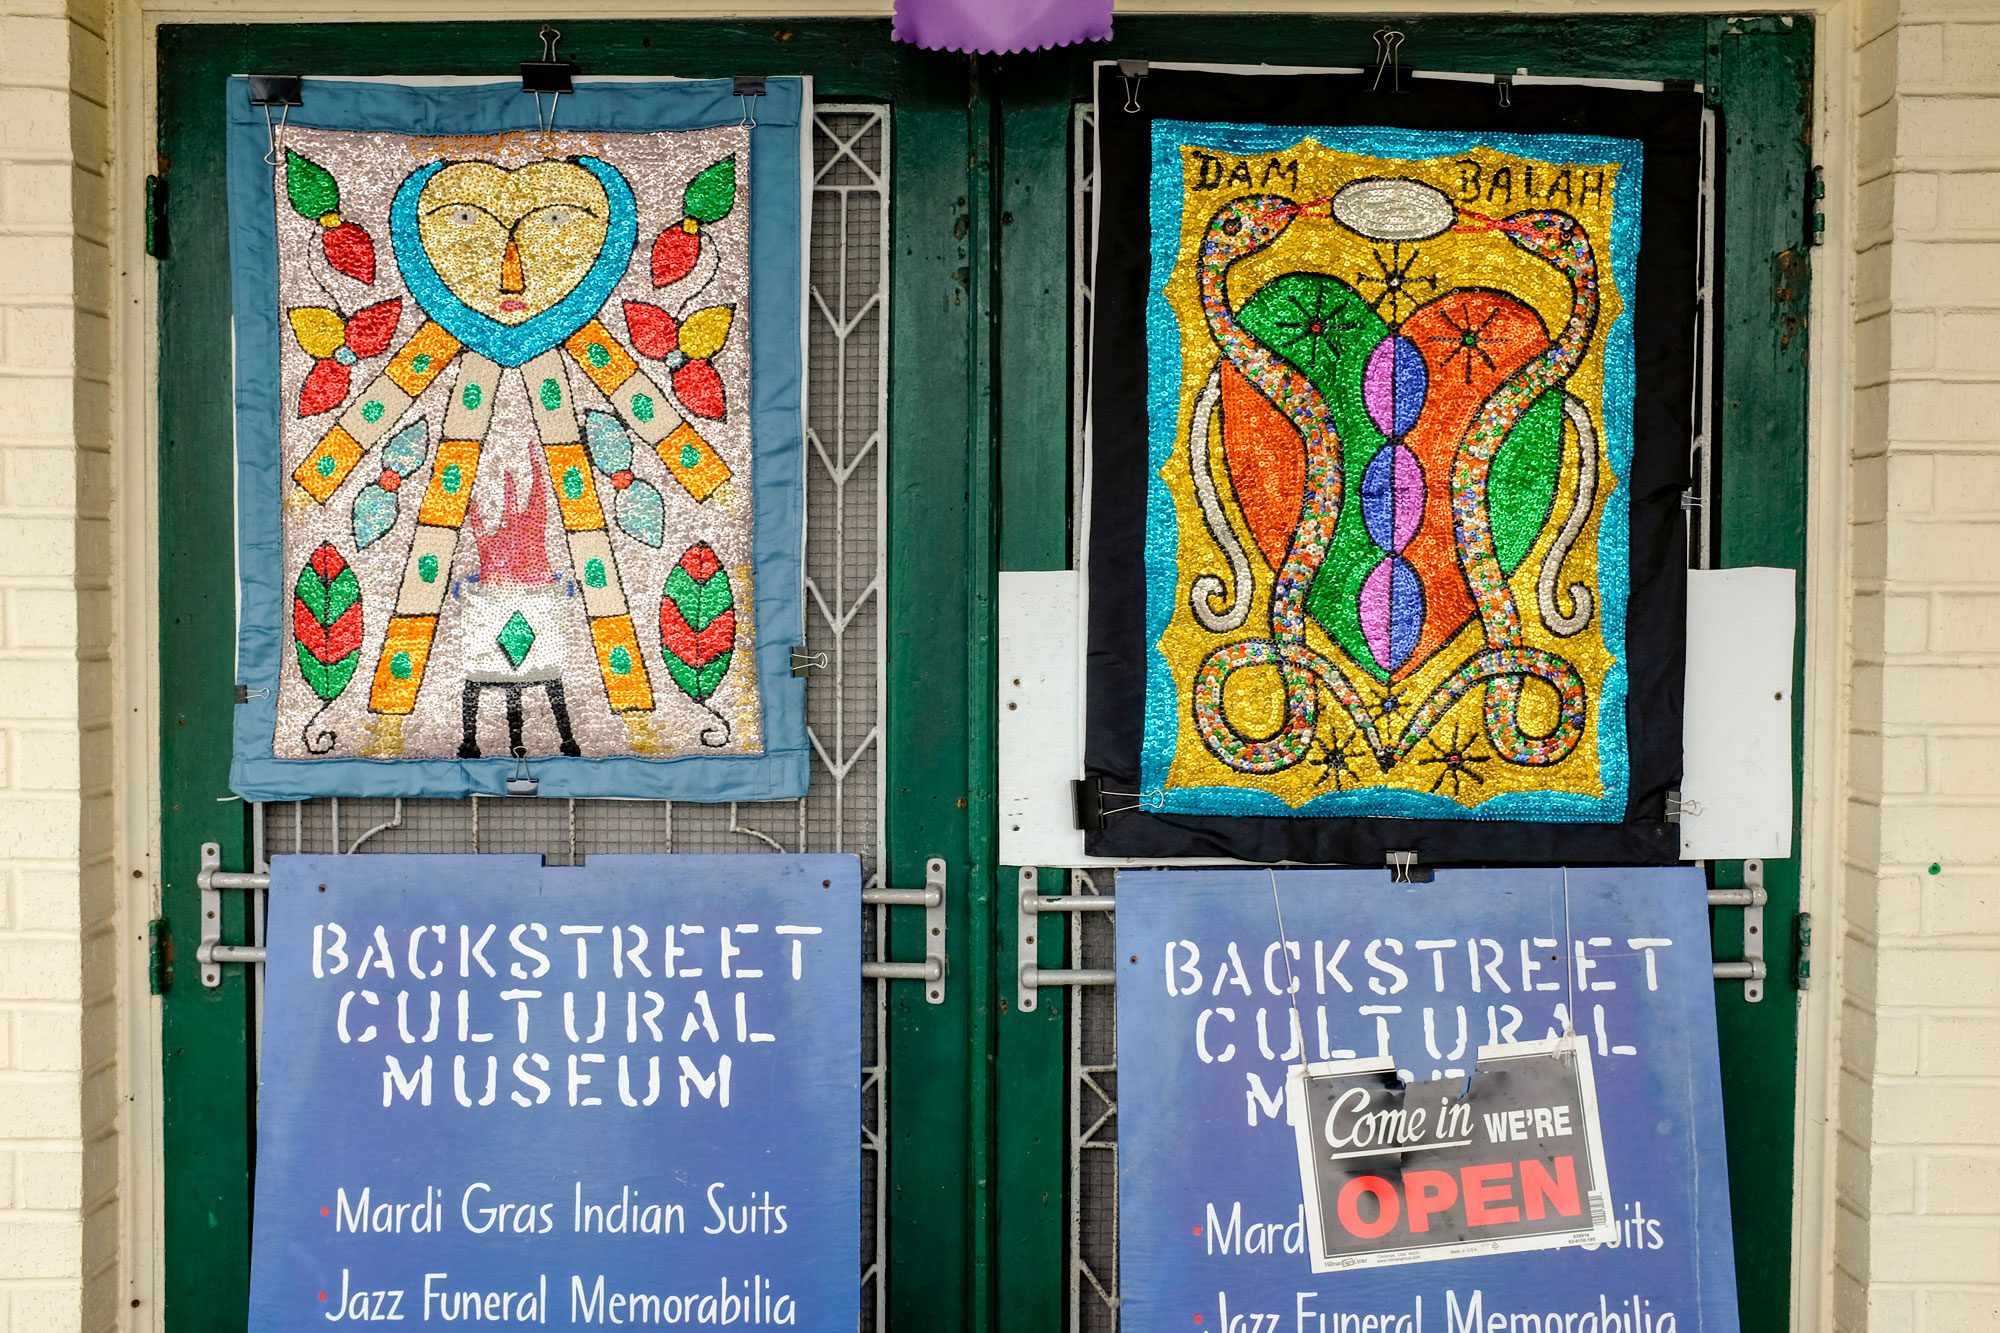 Doors of Backstreet Cultural Museum and open sign